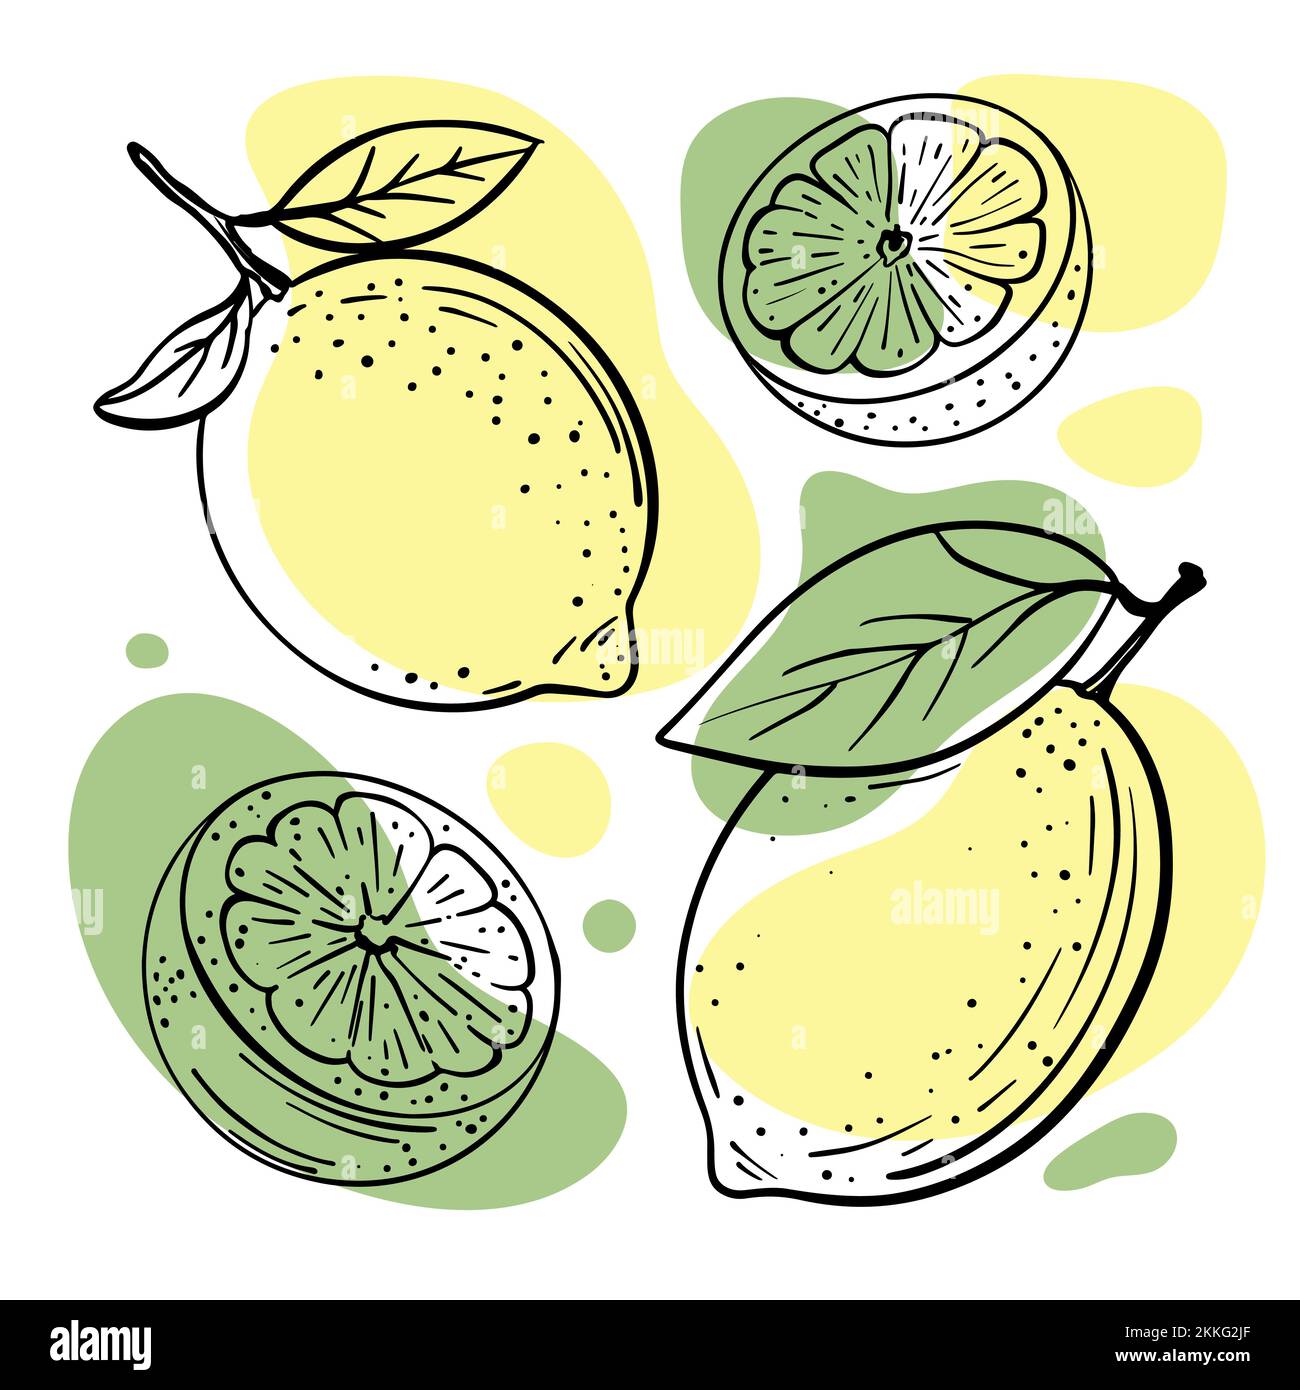 LEMON LIME Abstract Delicious Citrus Fruits With Leaves And Cut In Half For Design Your Store And Restaurant Menu Hand Drawn In Sketch Style Vector Il Stock Vector